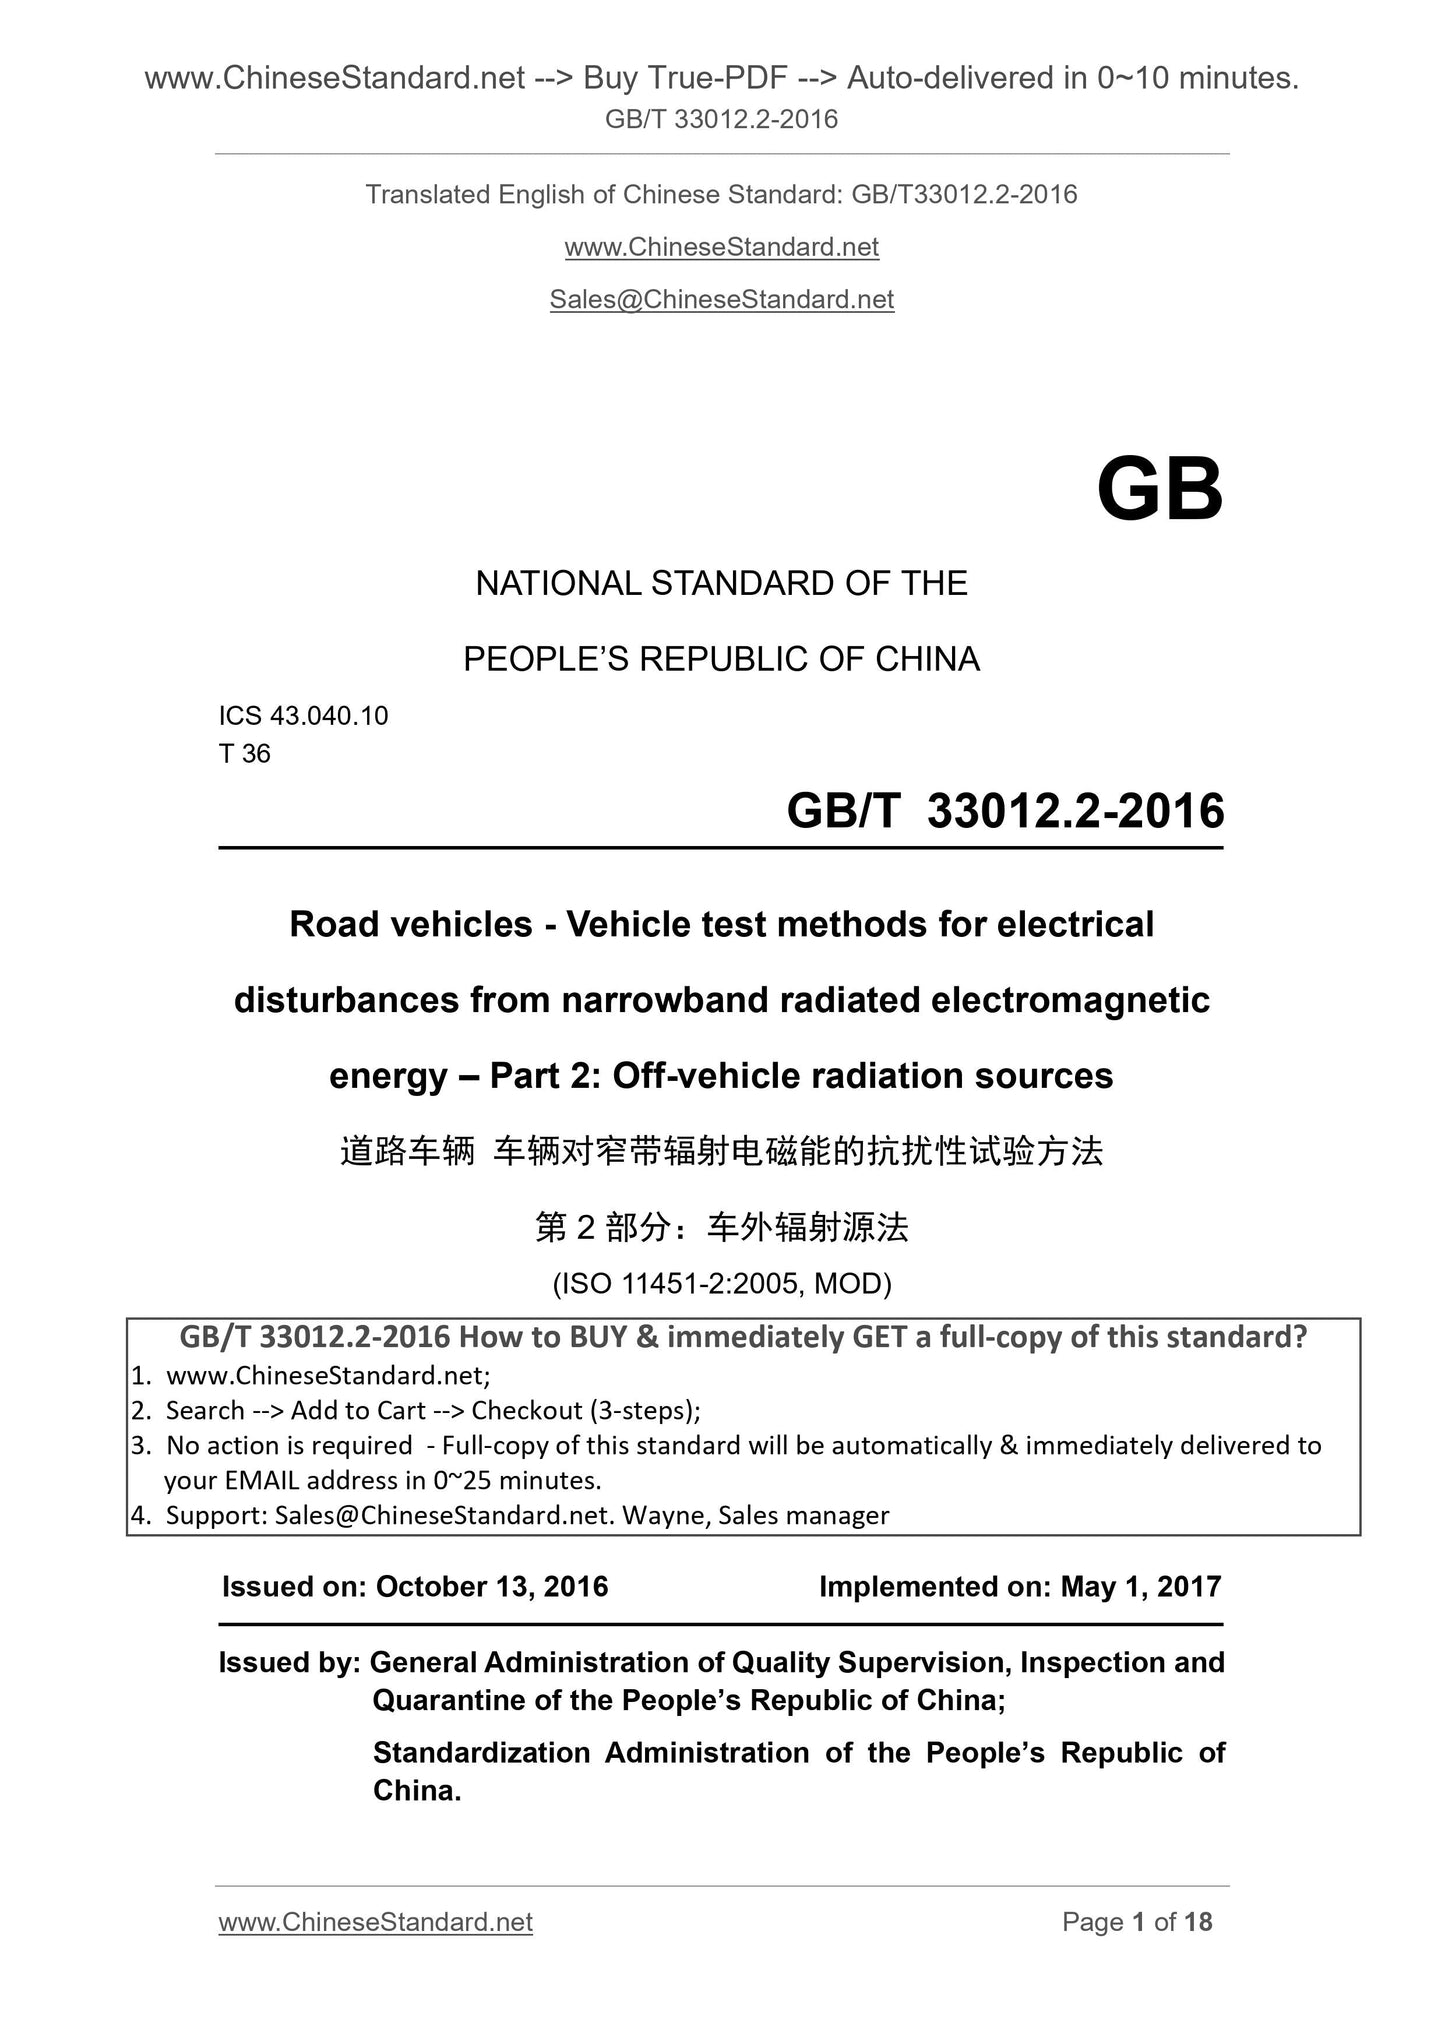 GB/T 33012.2-2016 Page 1